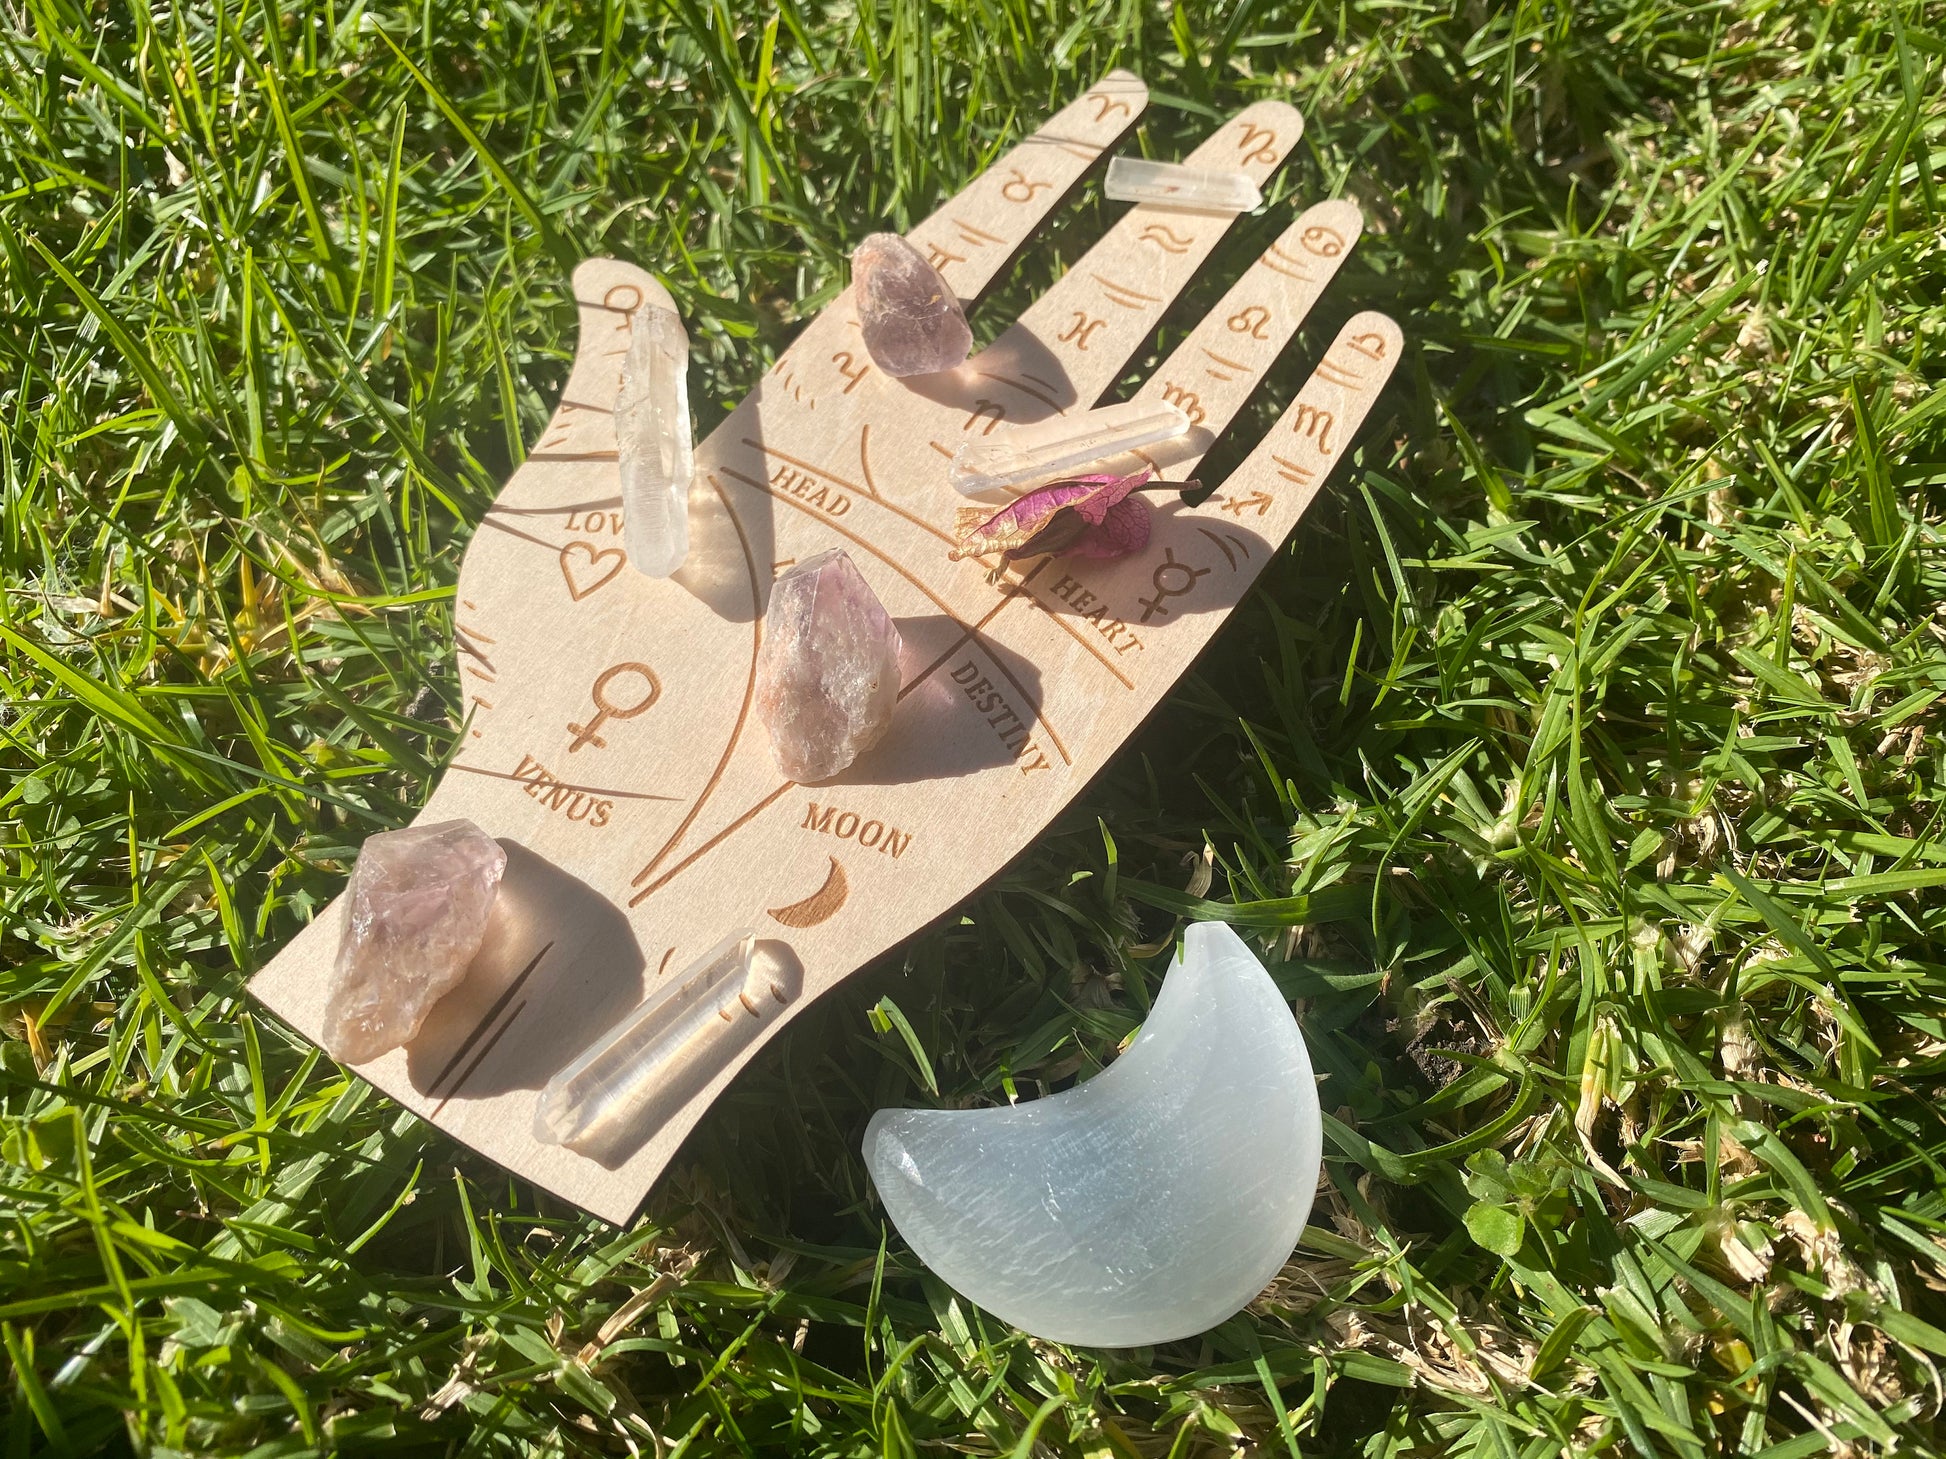 Palmistry hand wooden carved divination witchcraft kit wiccan supplies and tools